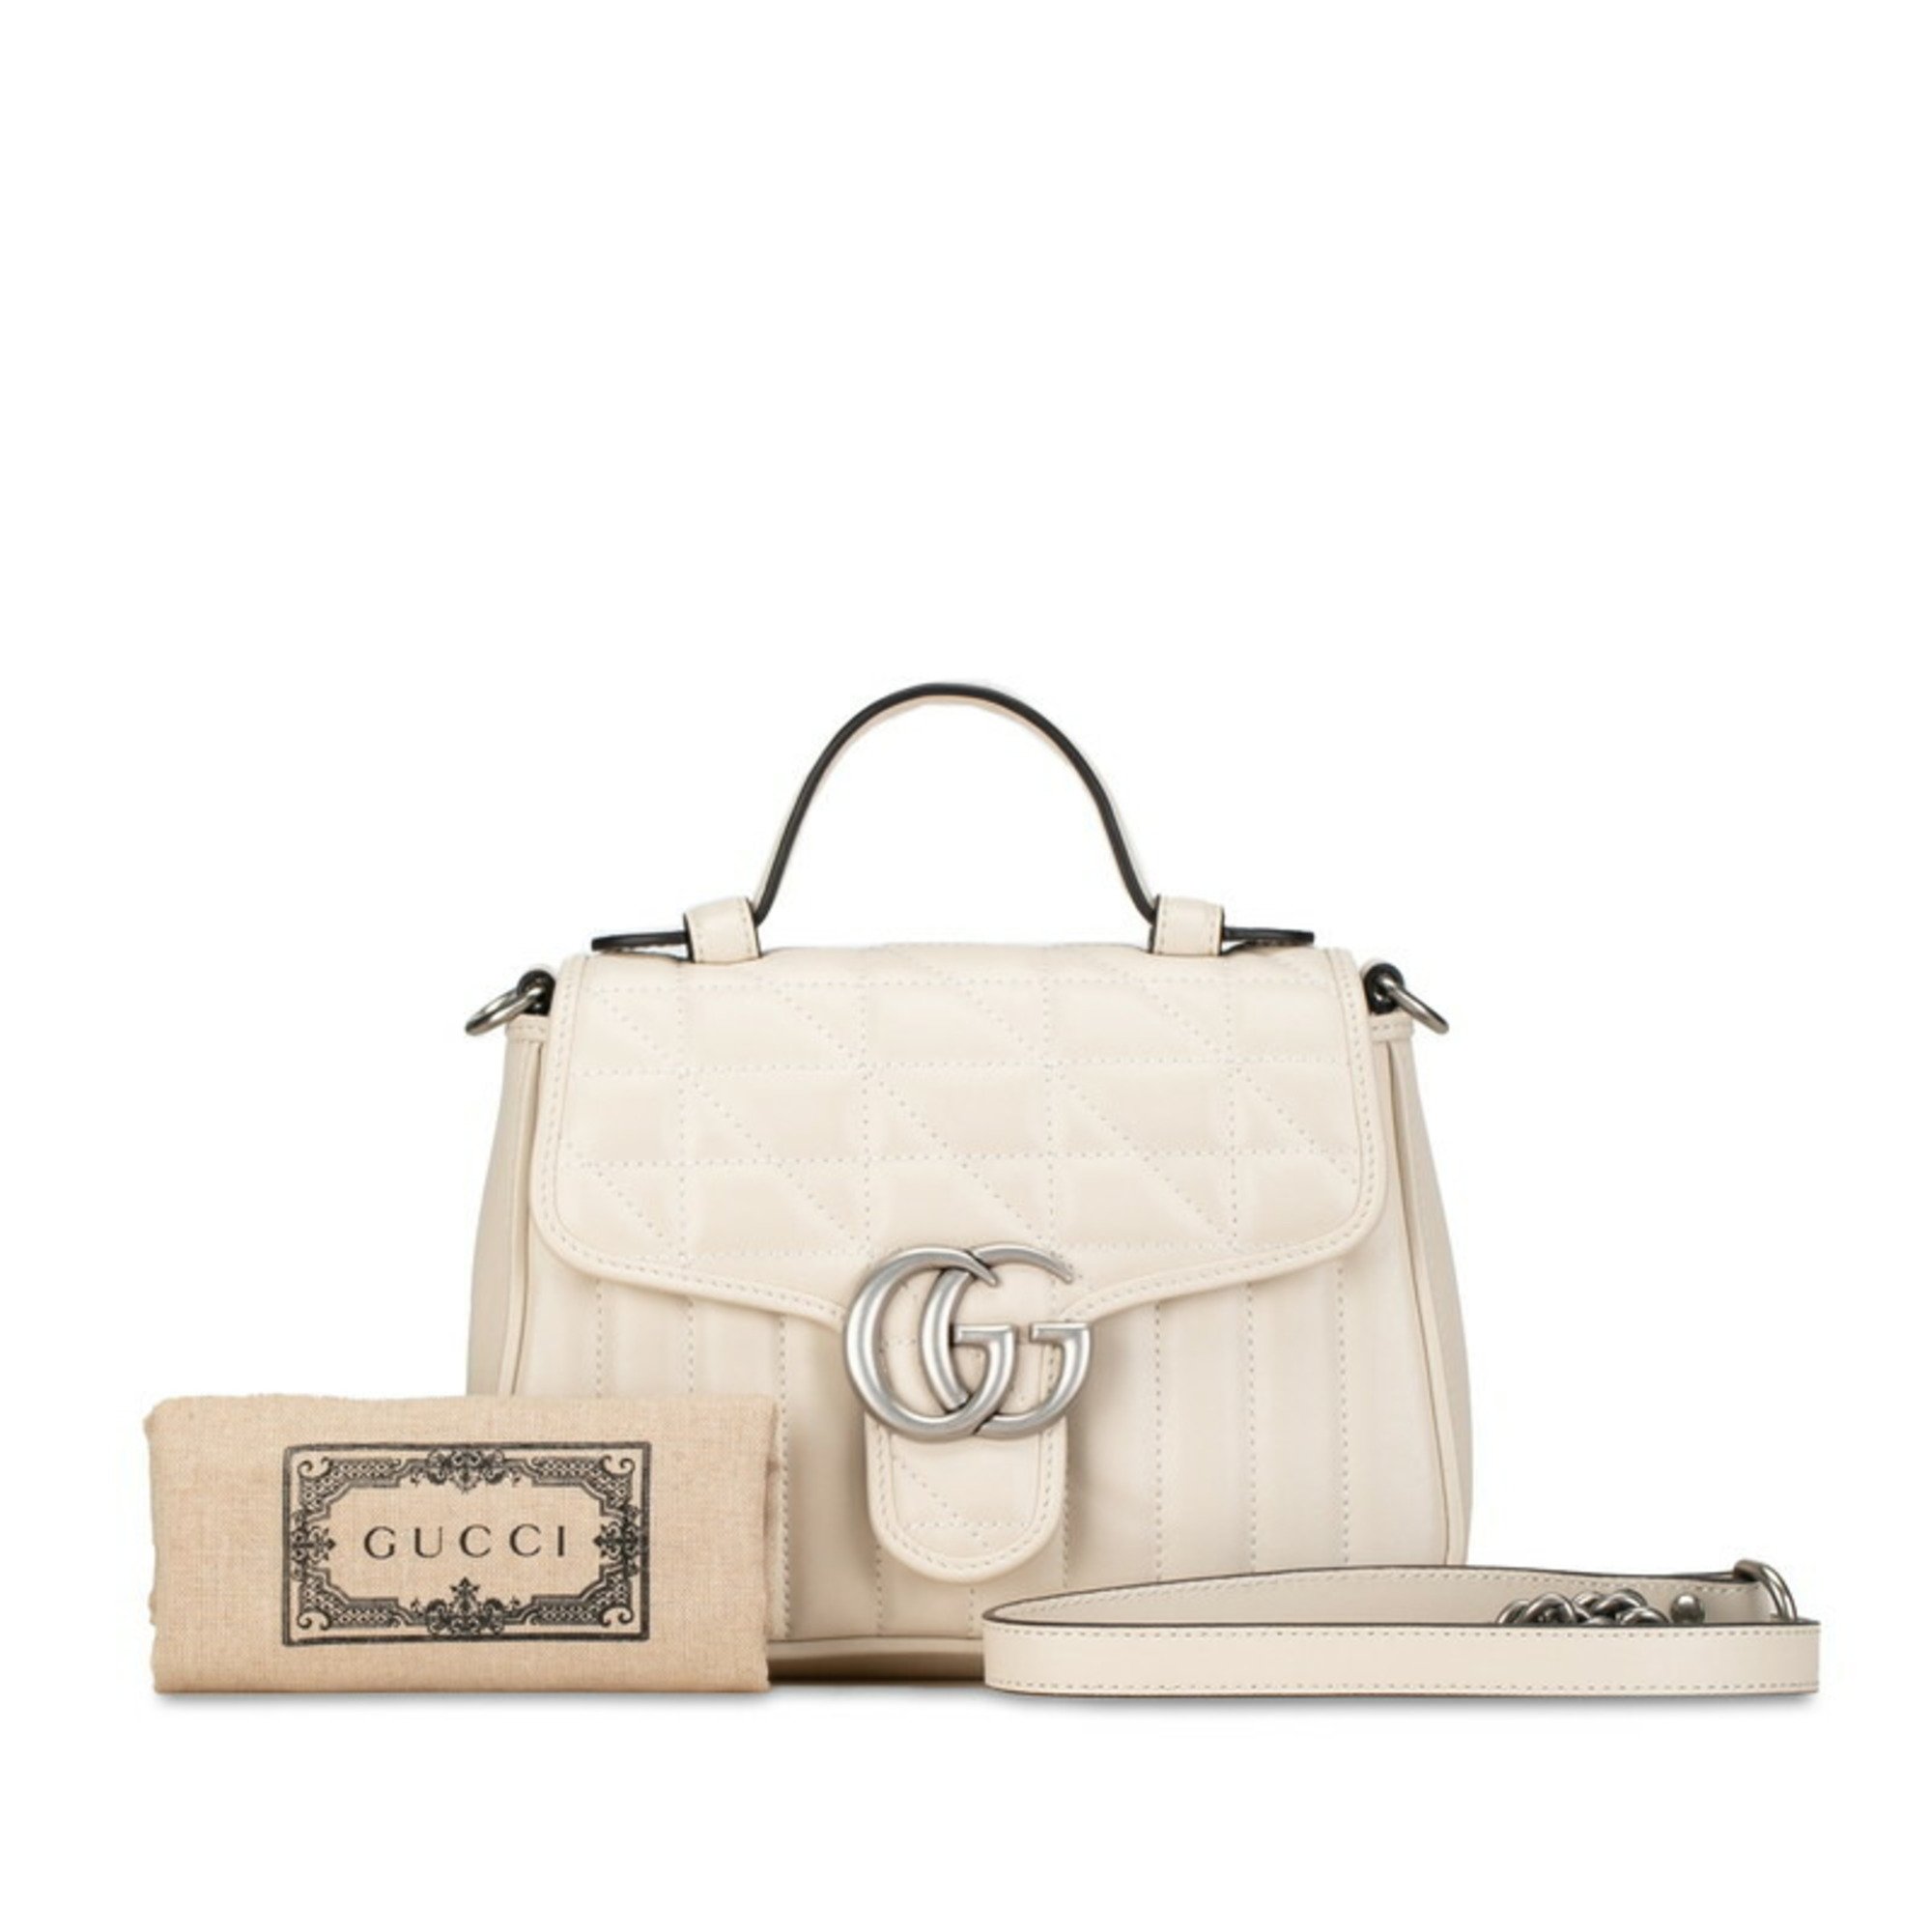 Gucci GG Marmont Bag Shoulder 583571 Ivory White Leather Women's GUCCI